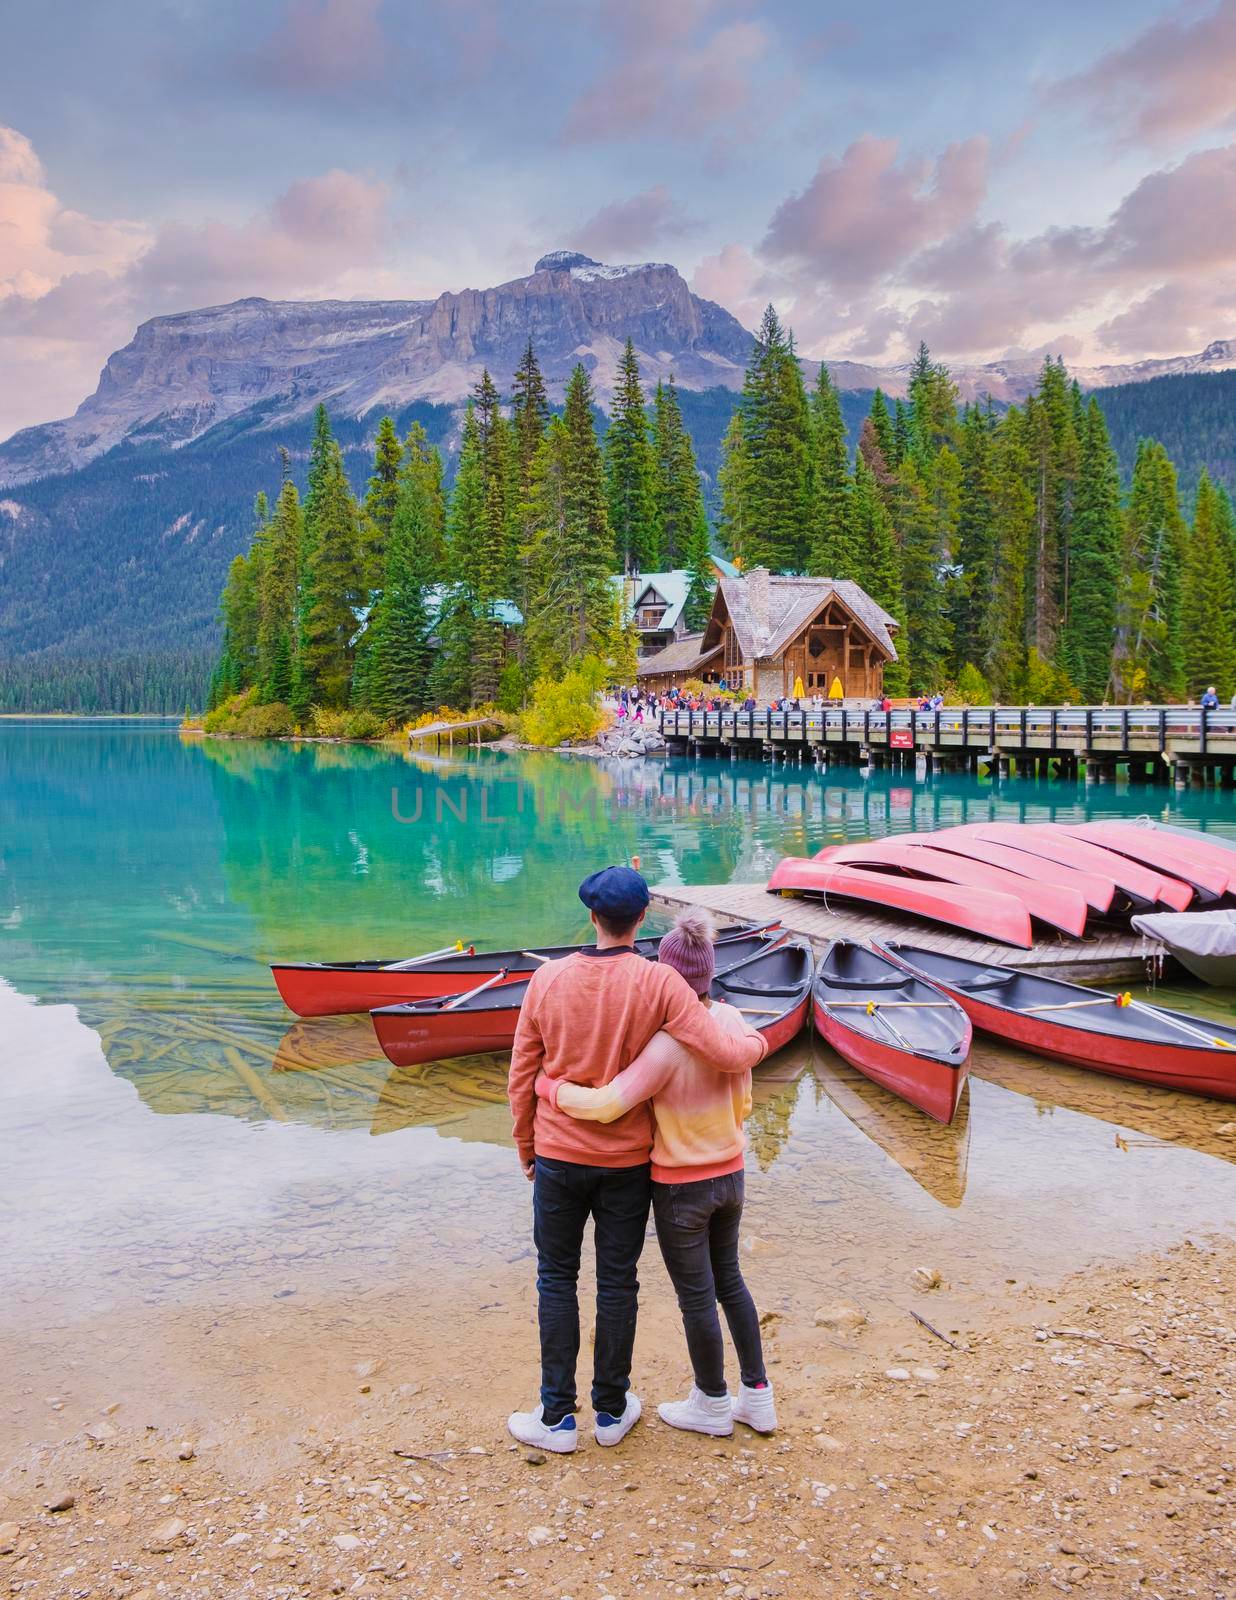 Emerald lake Yoho national park Canada British Colombia. beautiful lake in the Canadian Rockies during the Autumn fall season. Couple of men and women standing by the lake